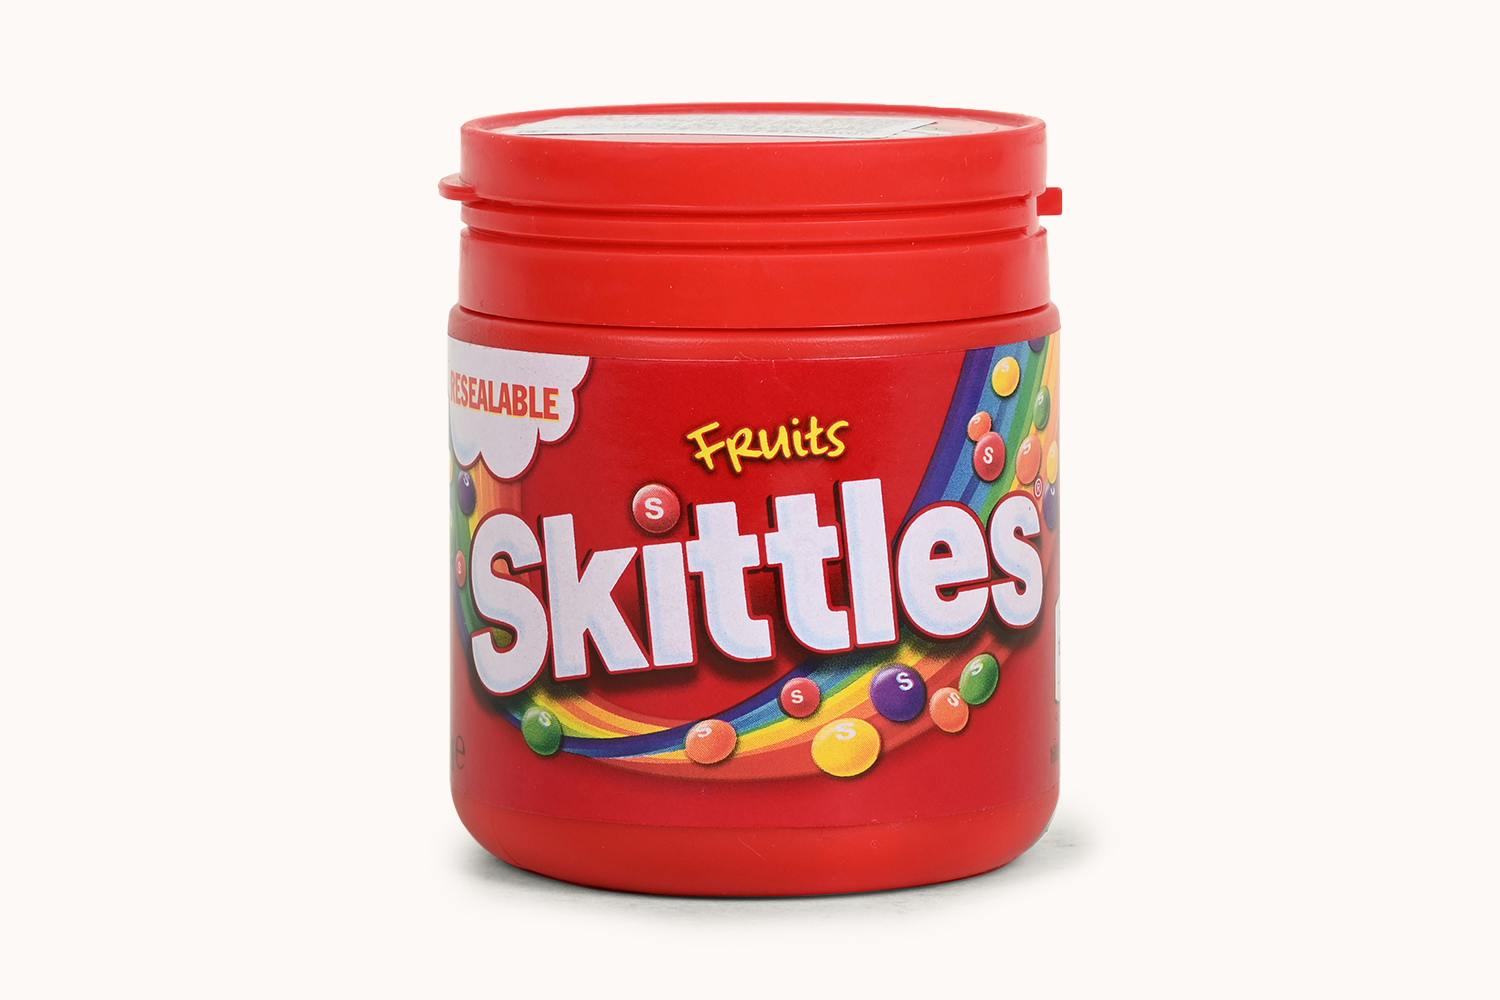 Skittles Crazy Sours Candy